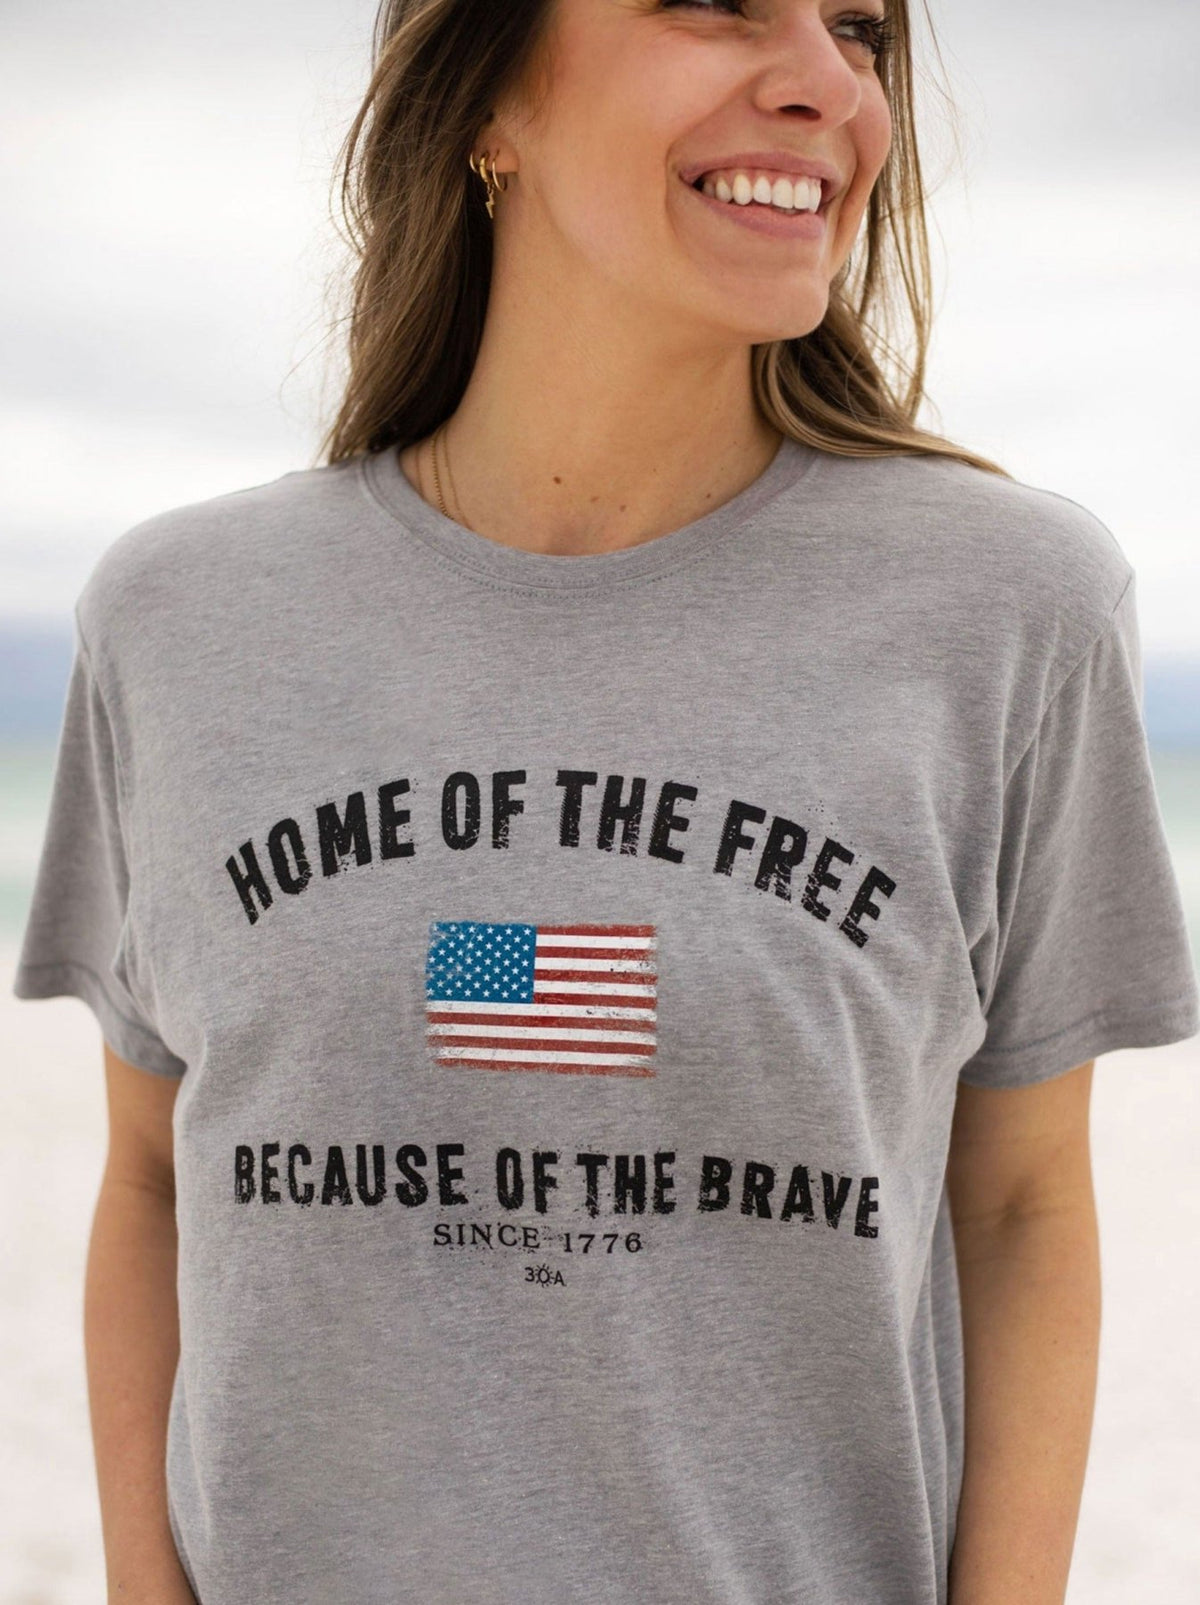 Home of the Free T - Shirt - 30A Gear - men tee